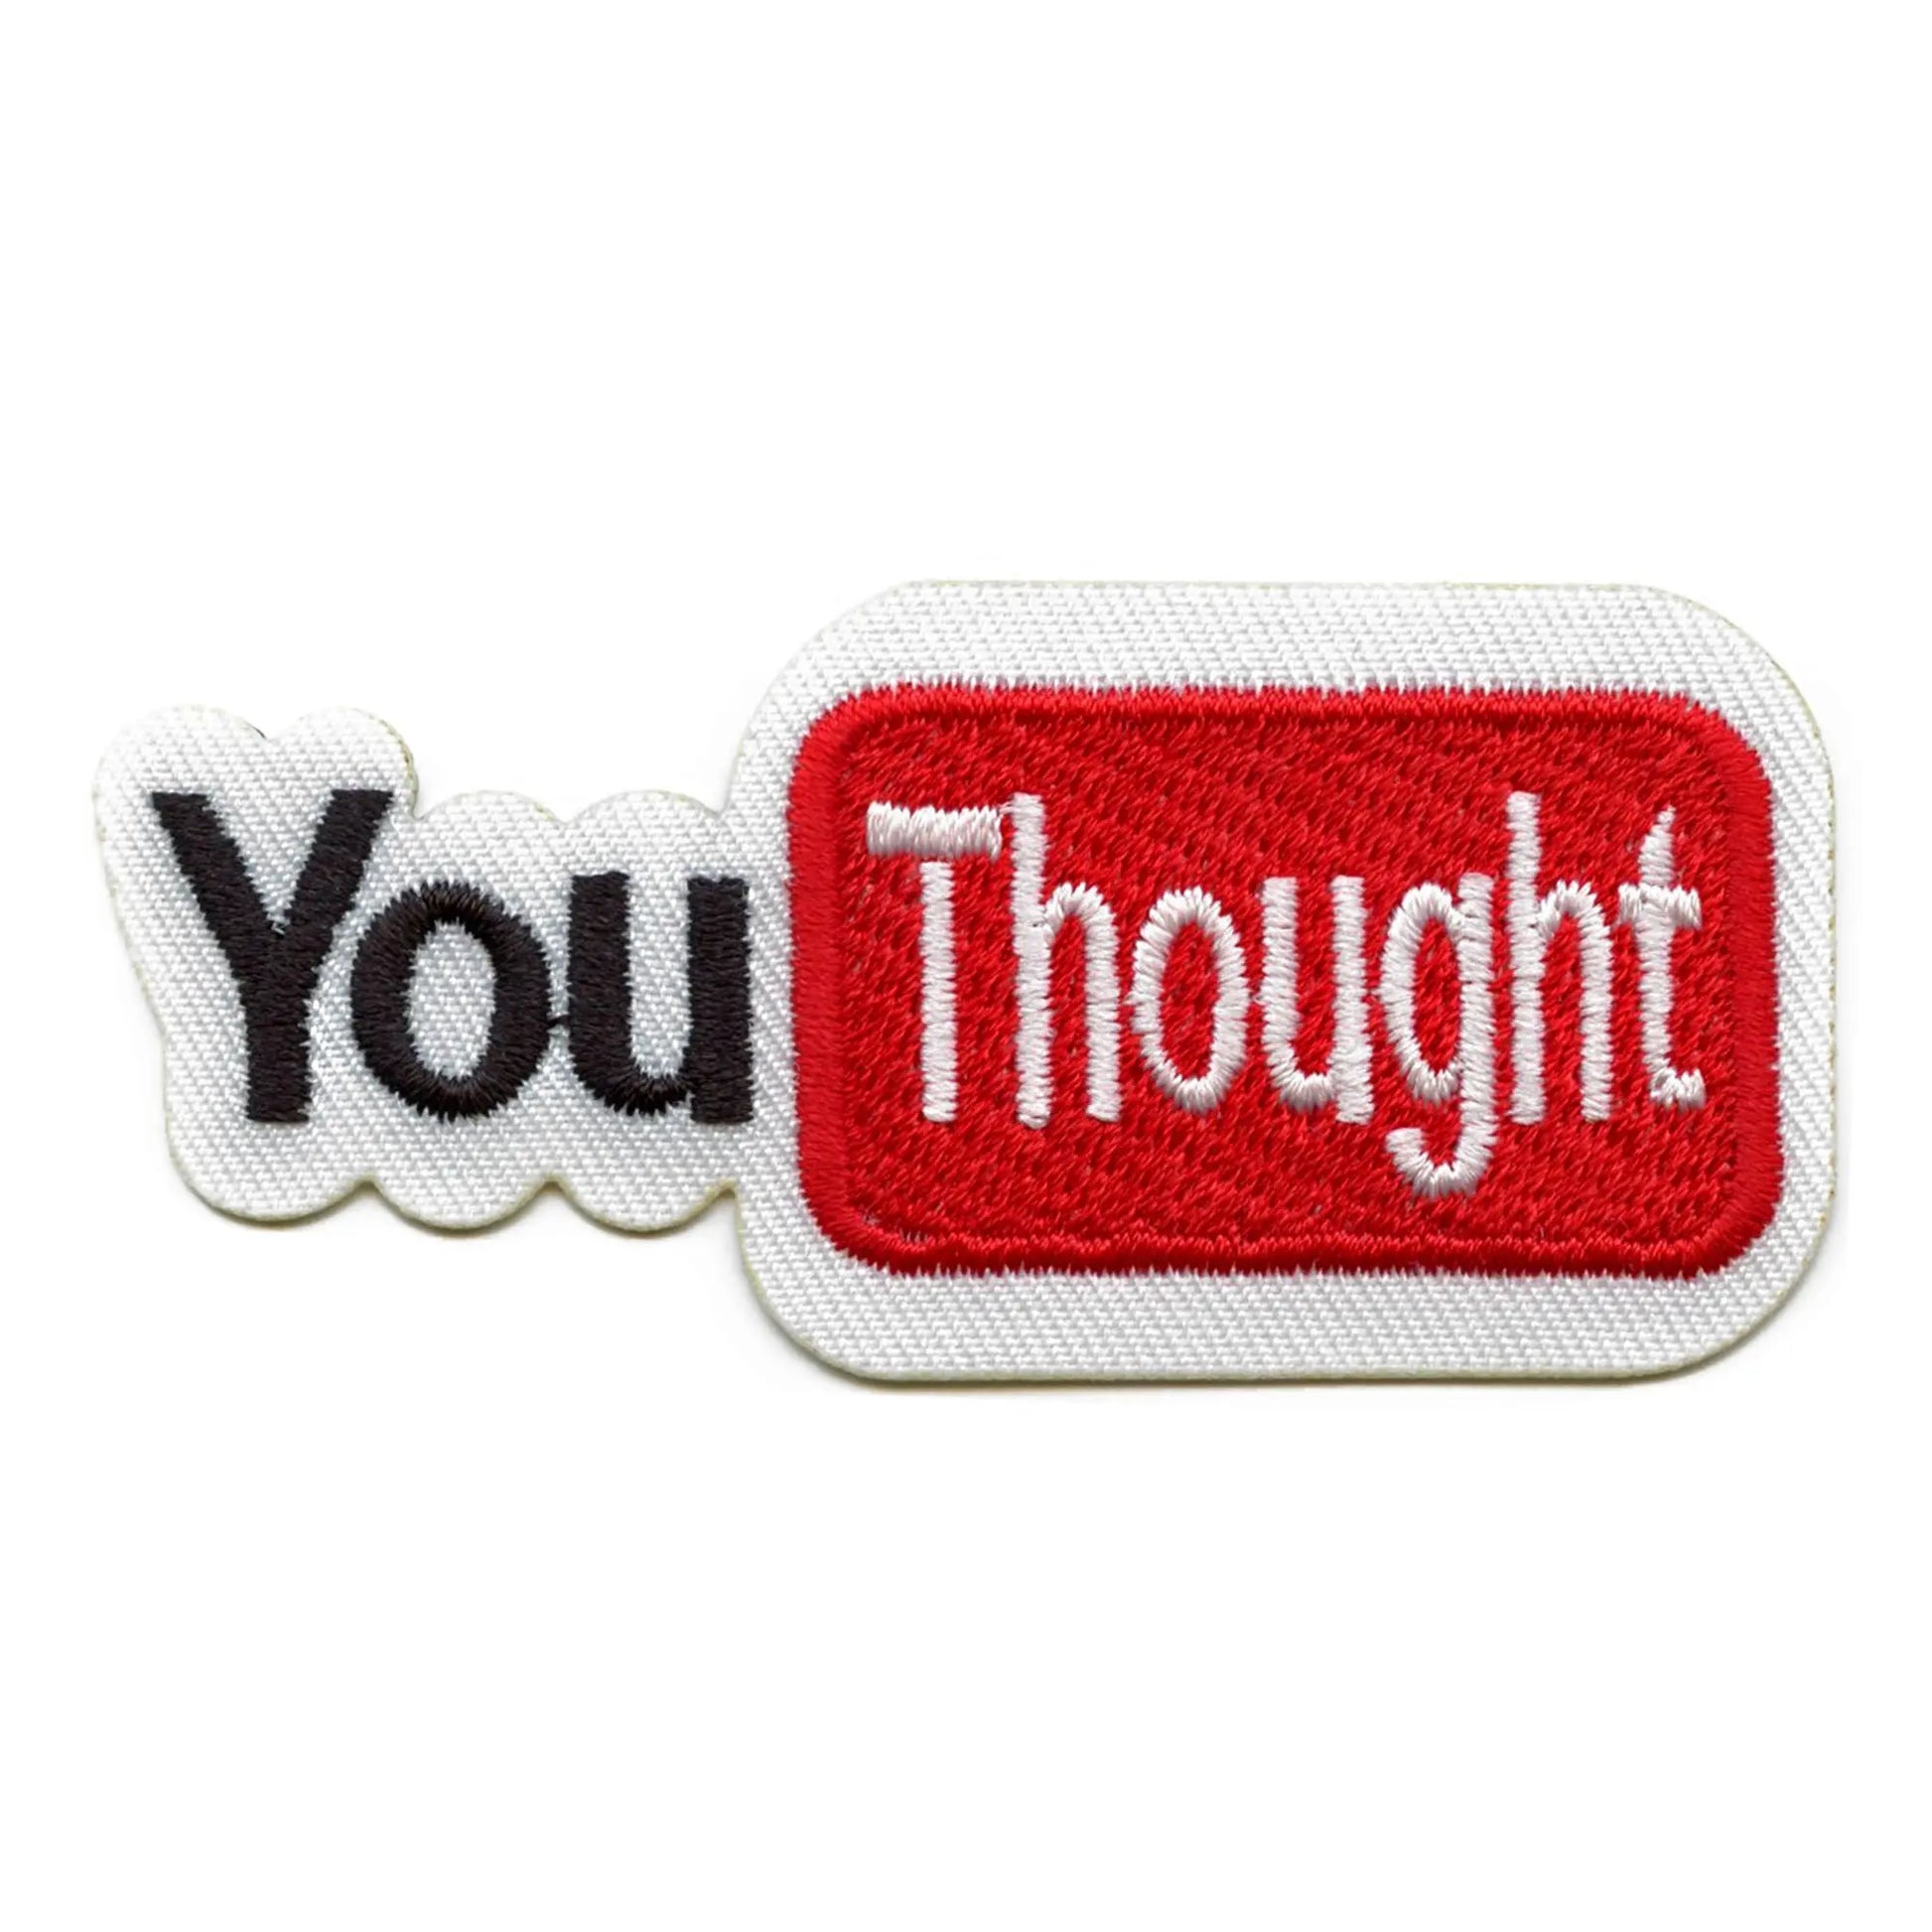 YouThought Funny Parody Embroidered Iron On Patch 